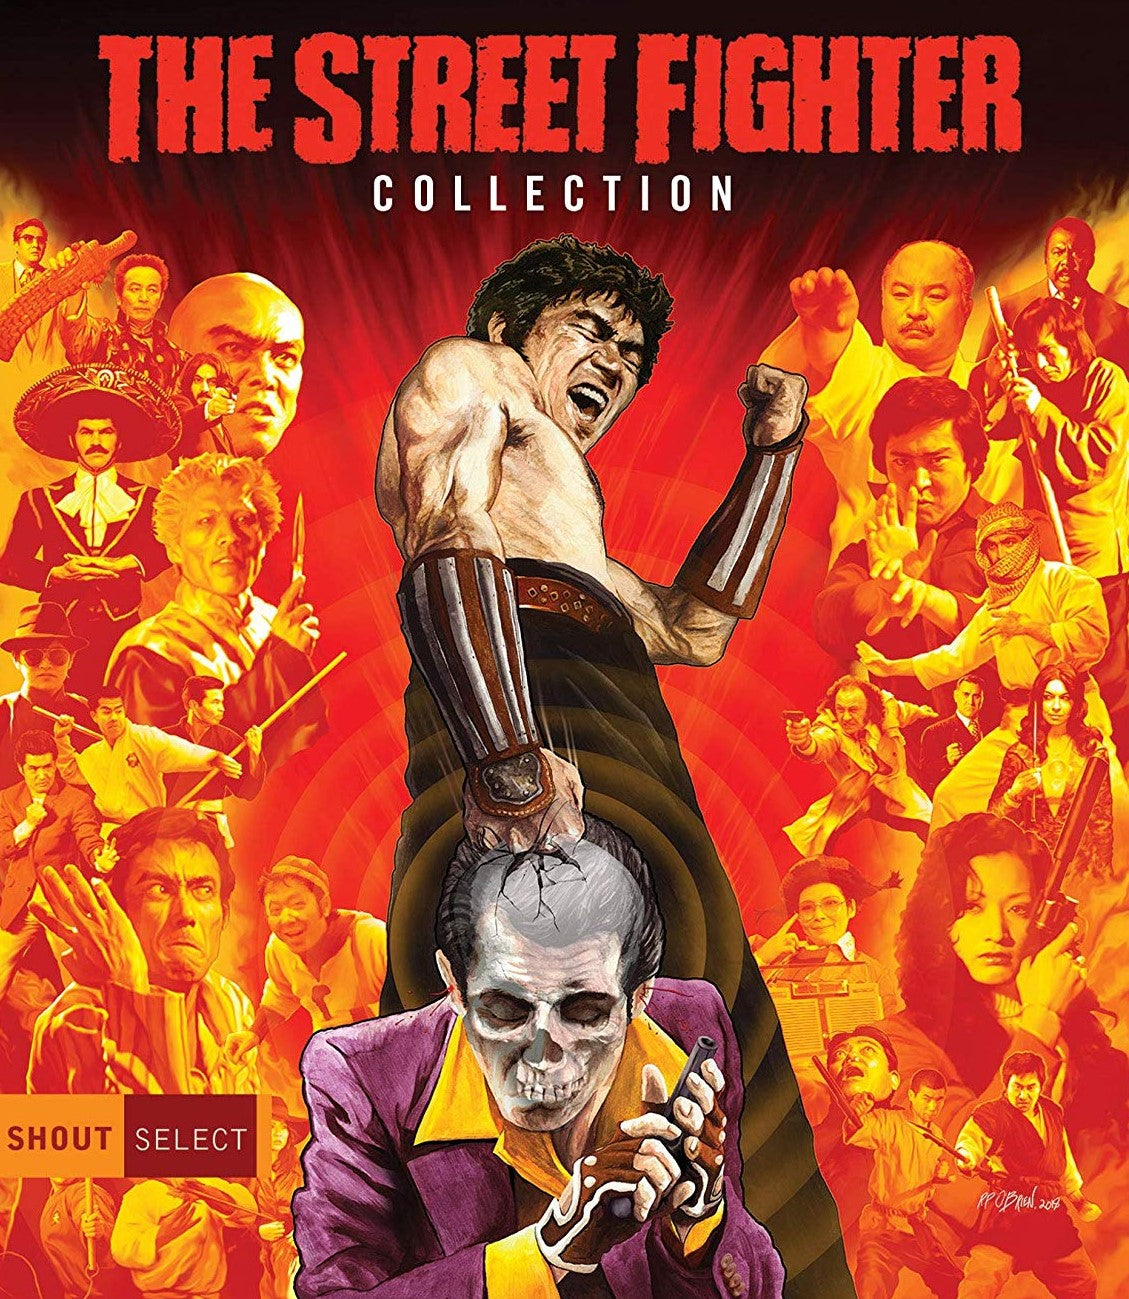 The Street Fighter Collection Blu-Ray Blu-Ray